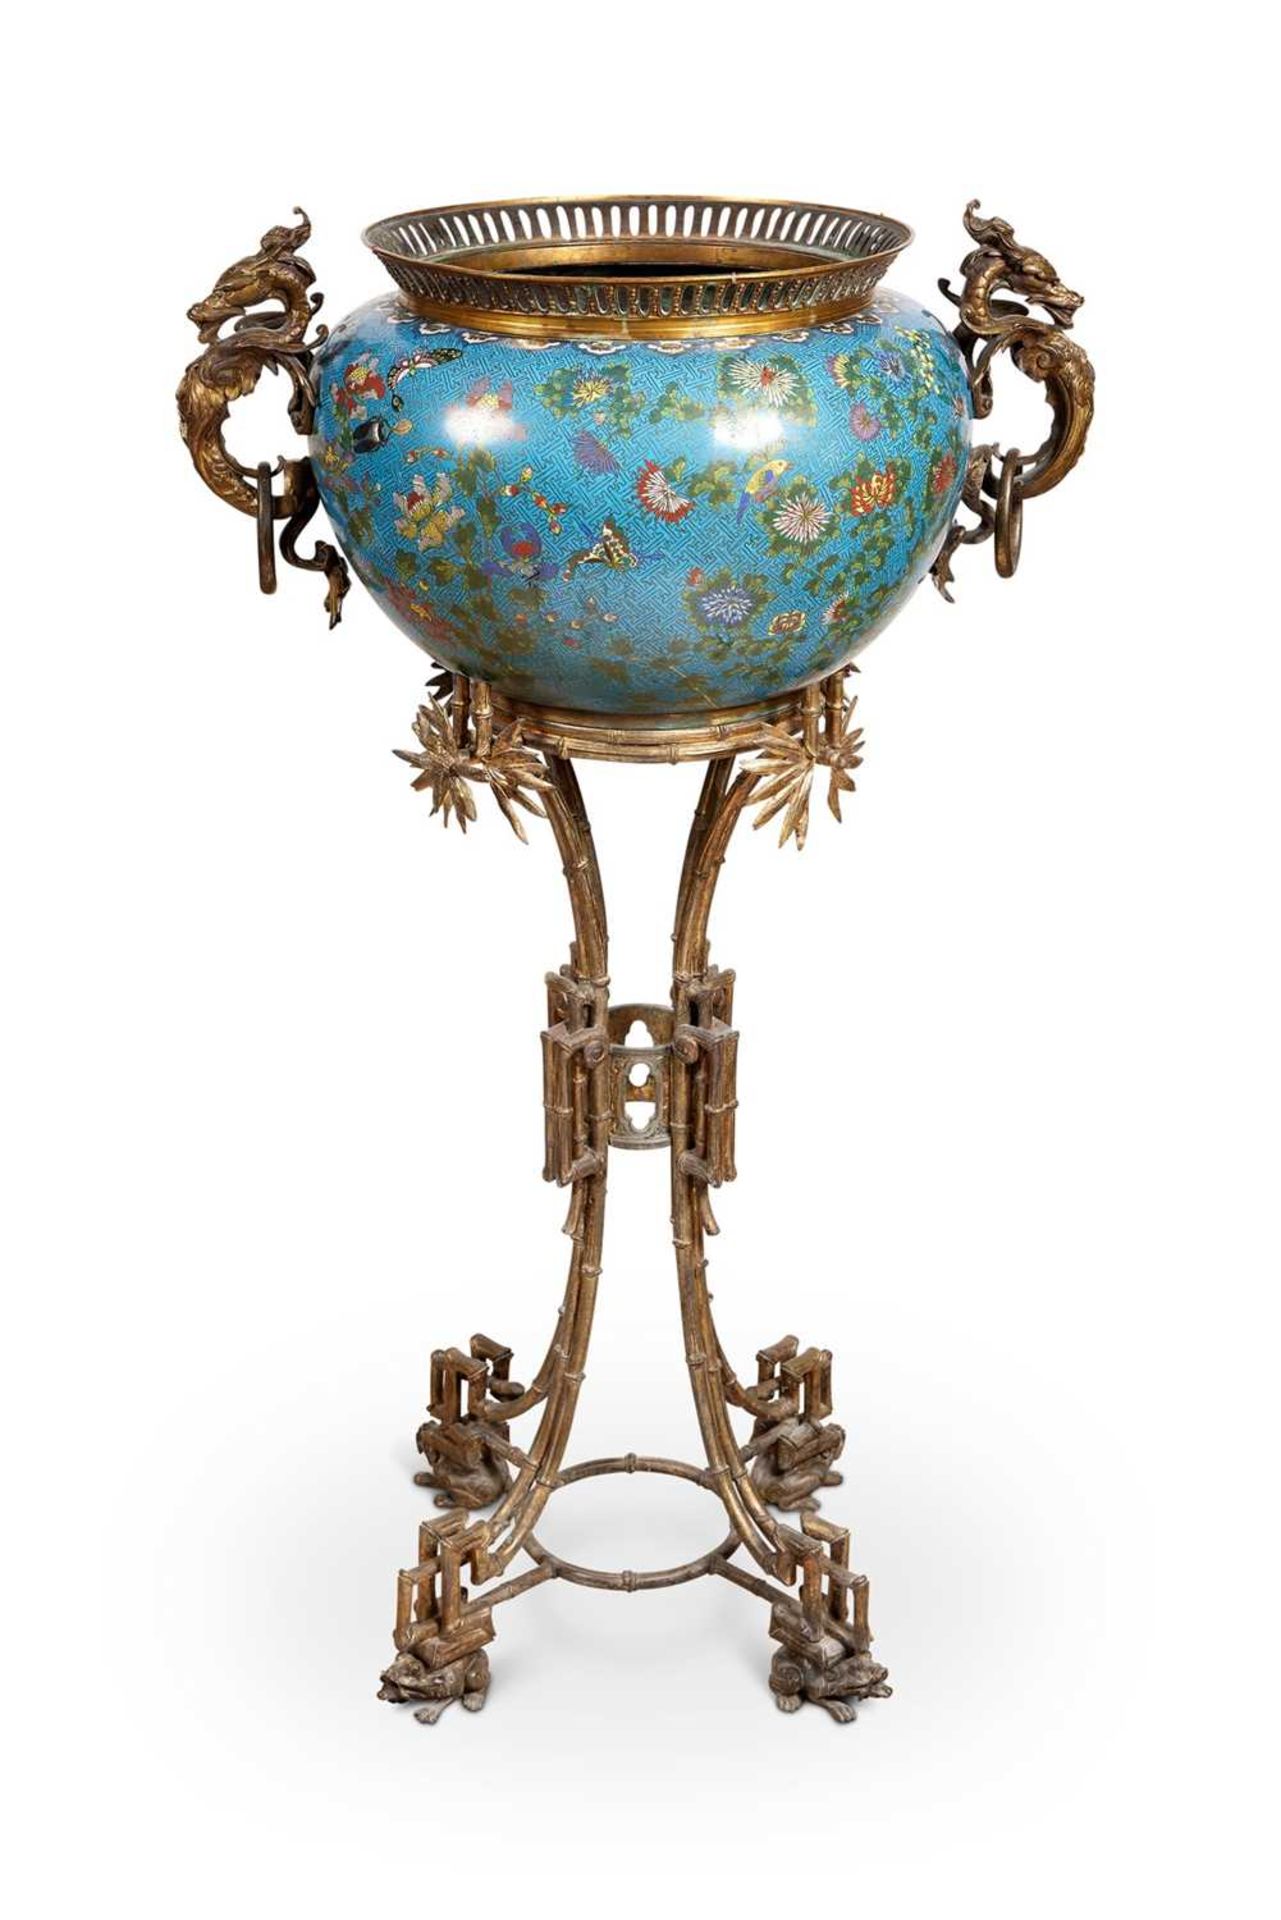 MAISON MARNYHAC: A 19TH CENTURY FRENCH JAPONISME JARDINIERE ON STAND